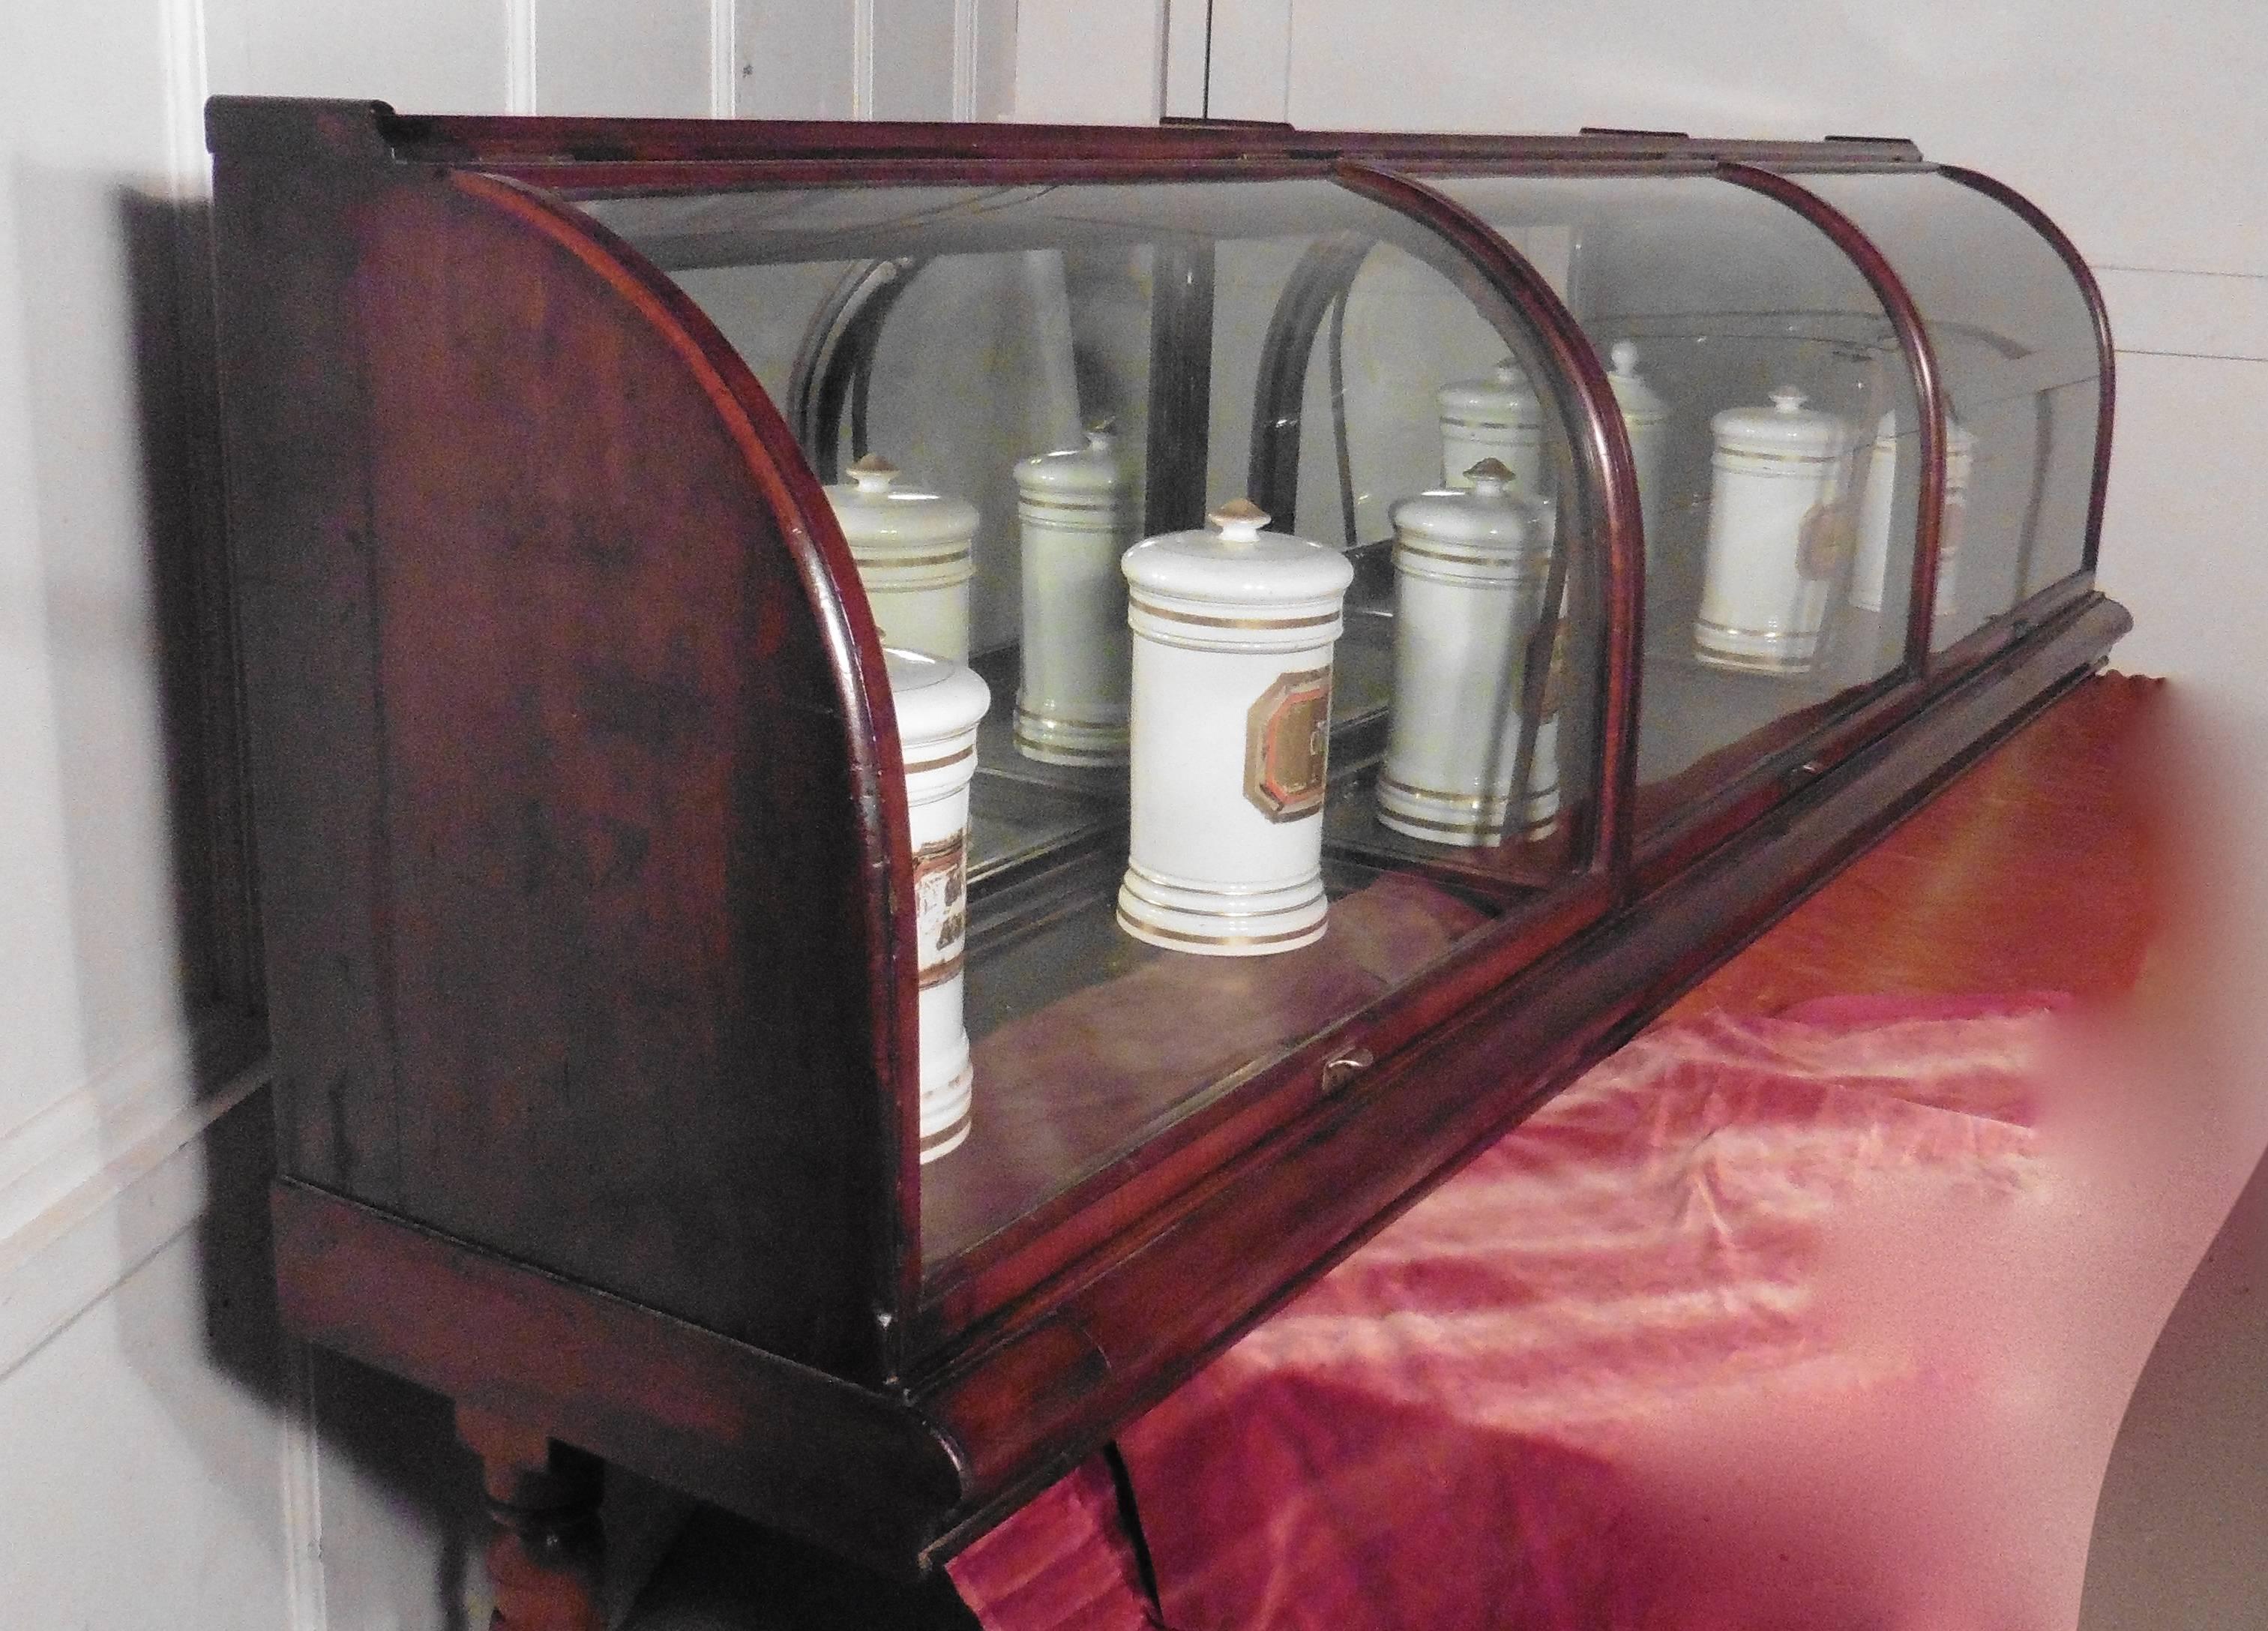 This is a very rare piece with curved glass at the front, the cabinet would have been set against the wall in a 19th century shop.
The Mahogany cabinet is divided into 3 sections by glass panels, it has a curved front surface (D shaped), with